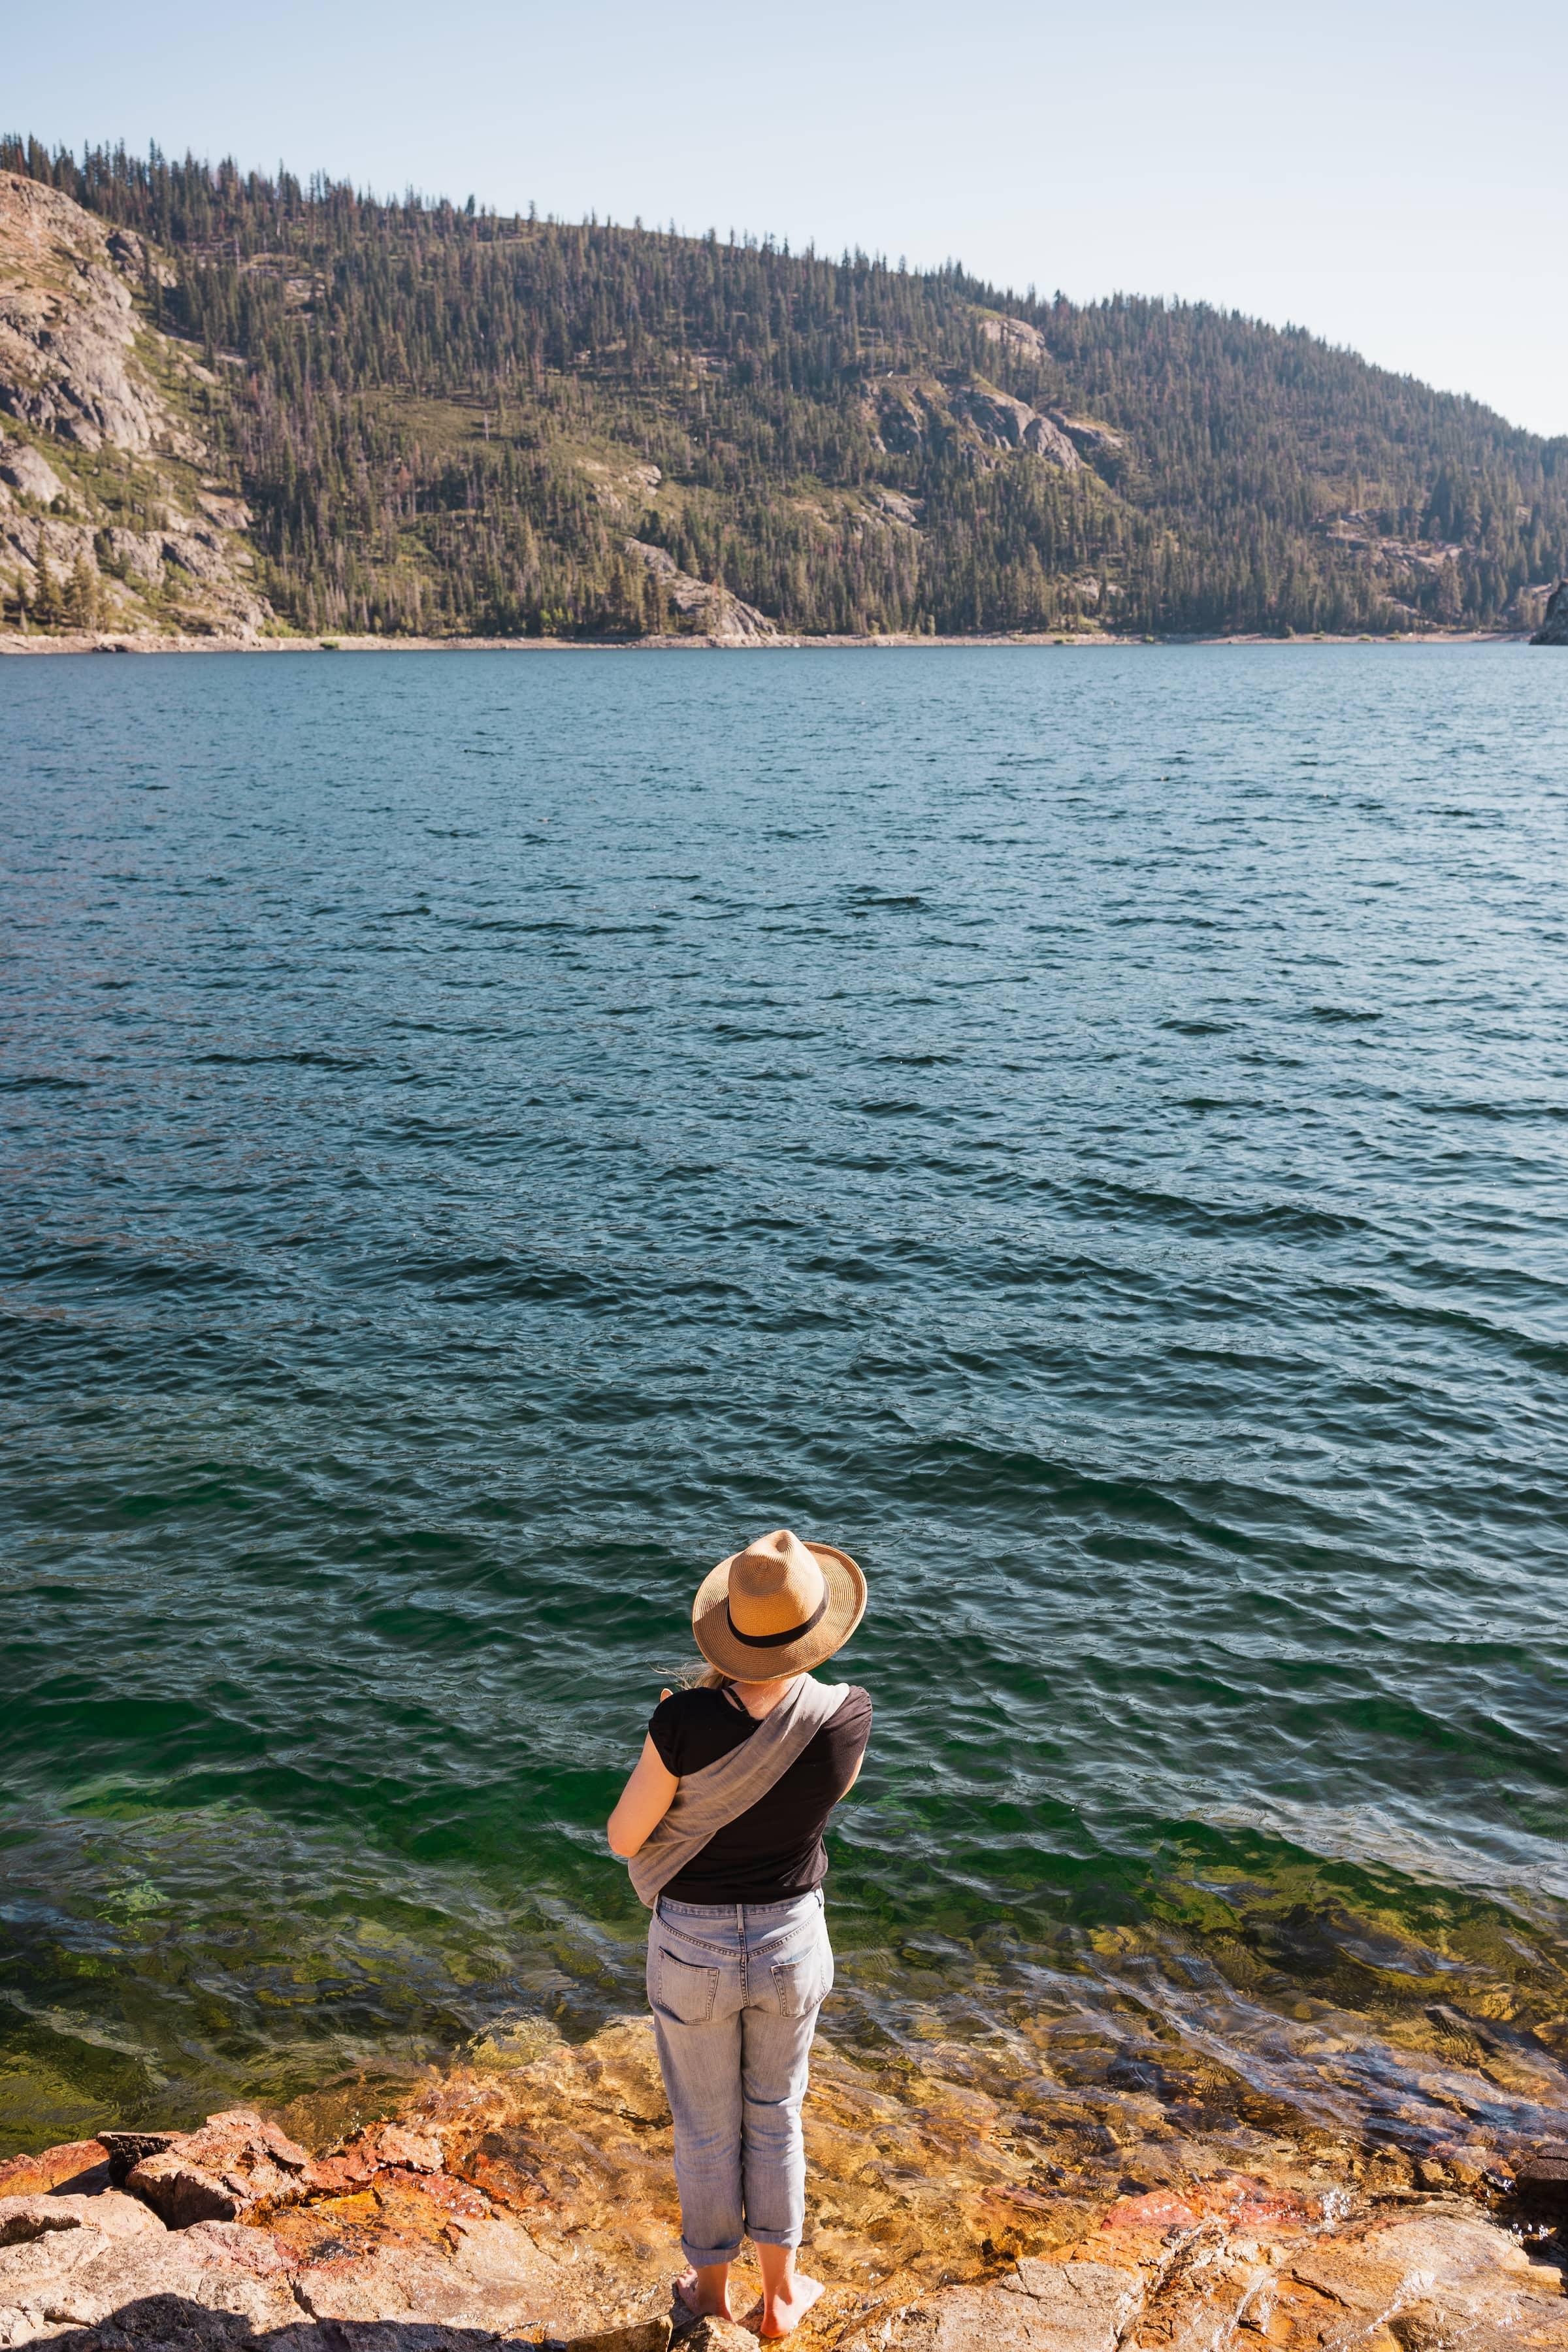 A woman is seen from the back, as she stands at the edge of a lake perched atop rocks, looking out to the distance with mountains on the shore of the other side.